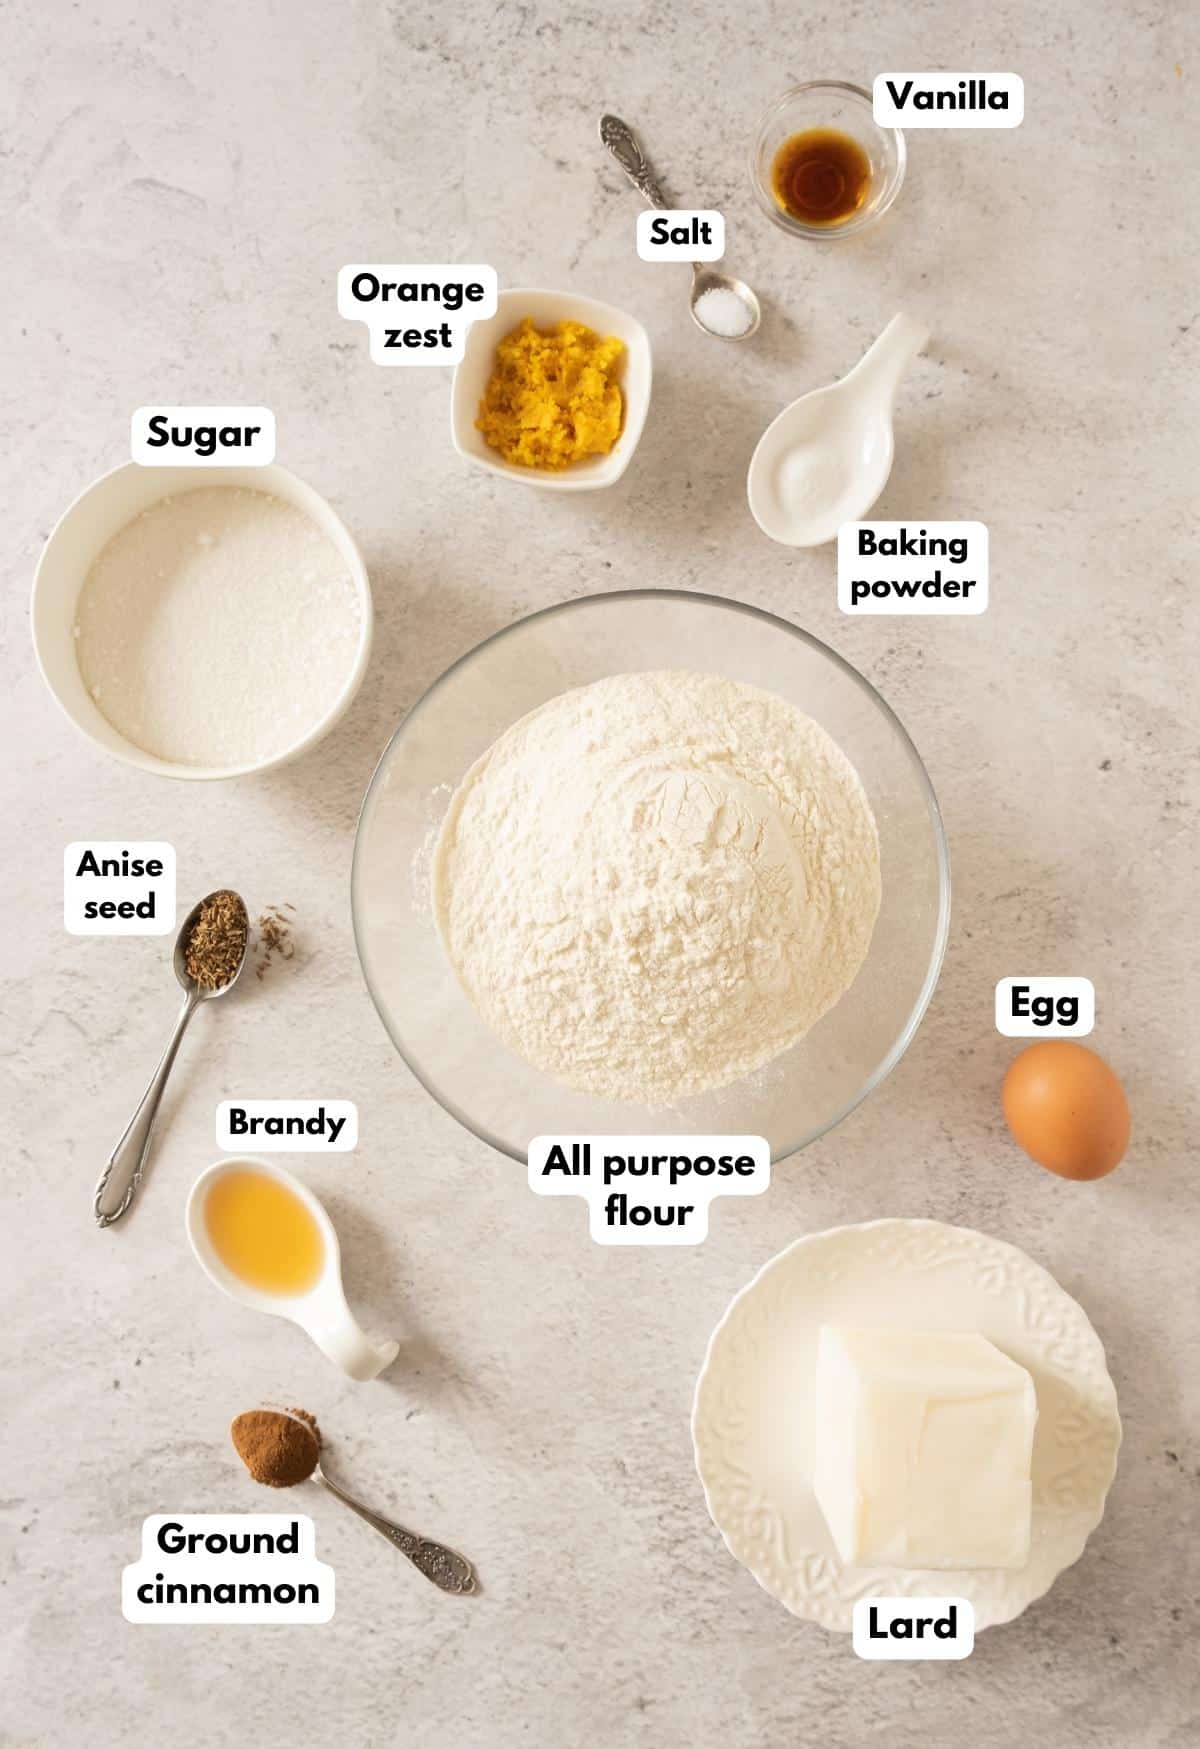 The ingredients needed to make the cookies.